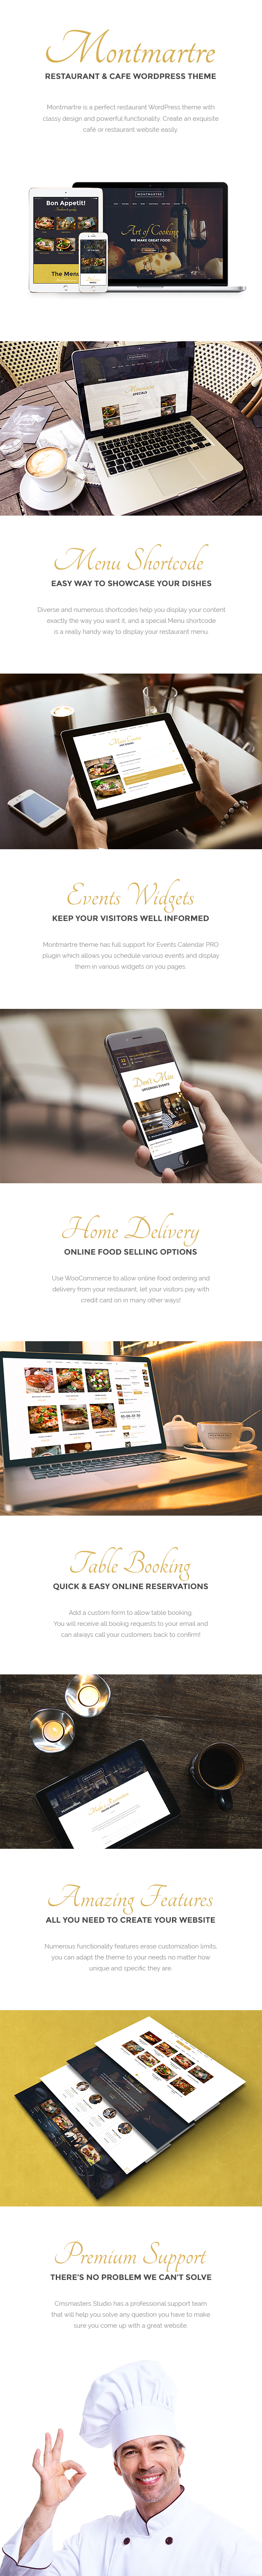 Website pages on the topic of restaurants.